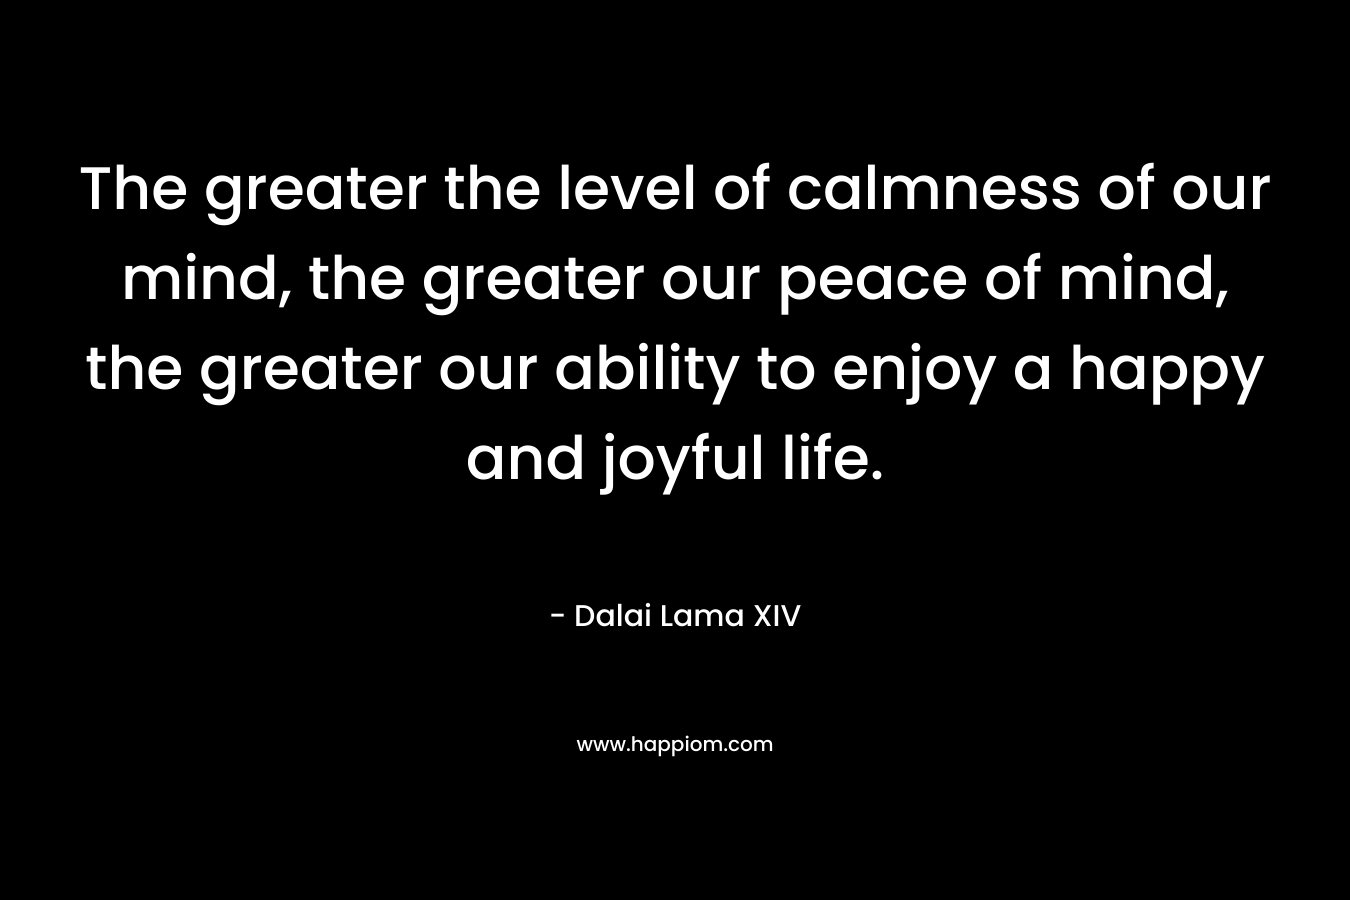 The greater the level of calmness of our mind, the greater our peace of mind, the greater our ability to enjoy a happy and joyful life. – Dalai Lama XIV